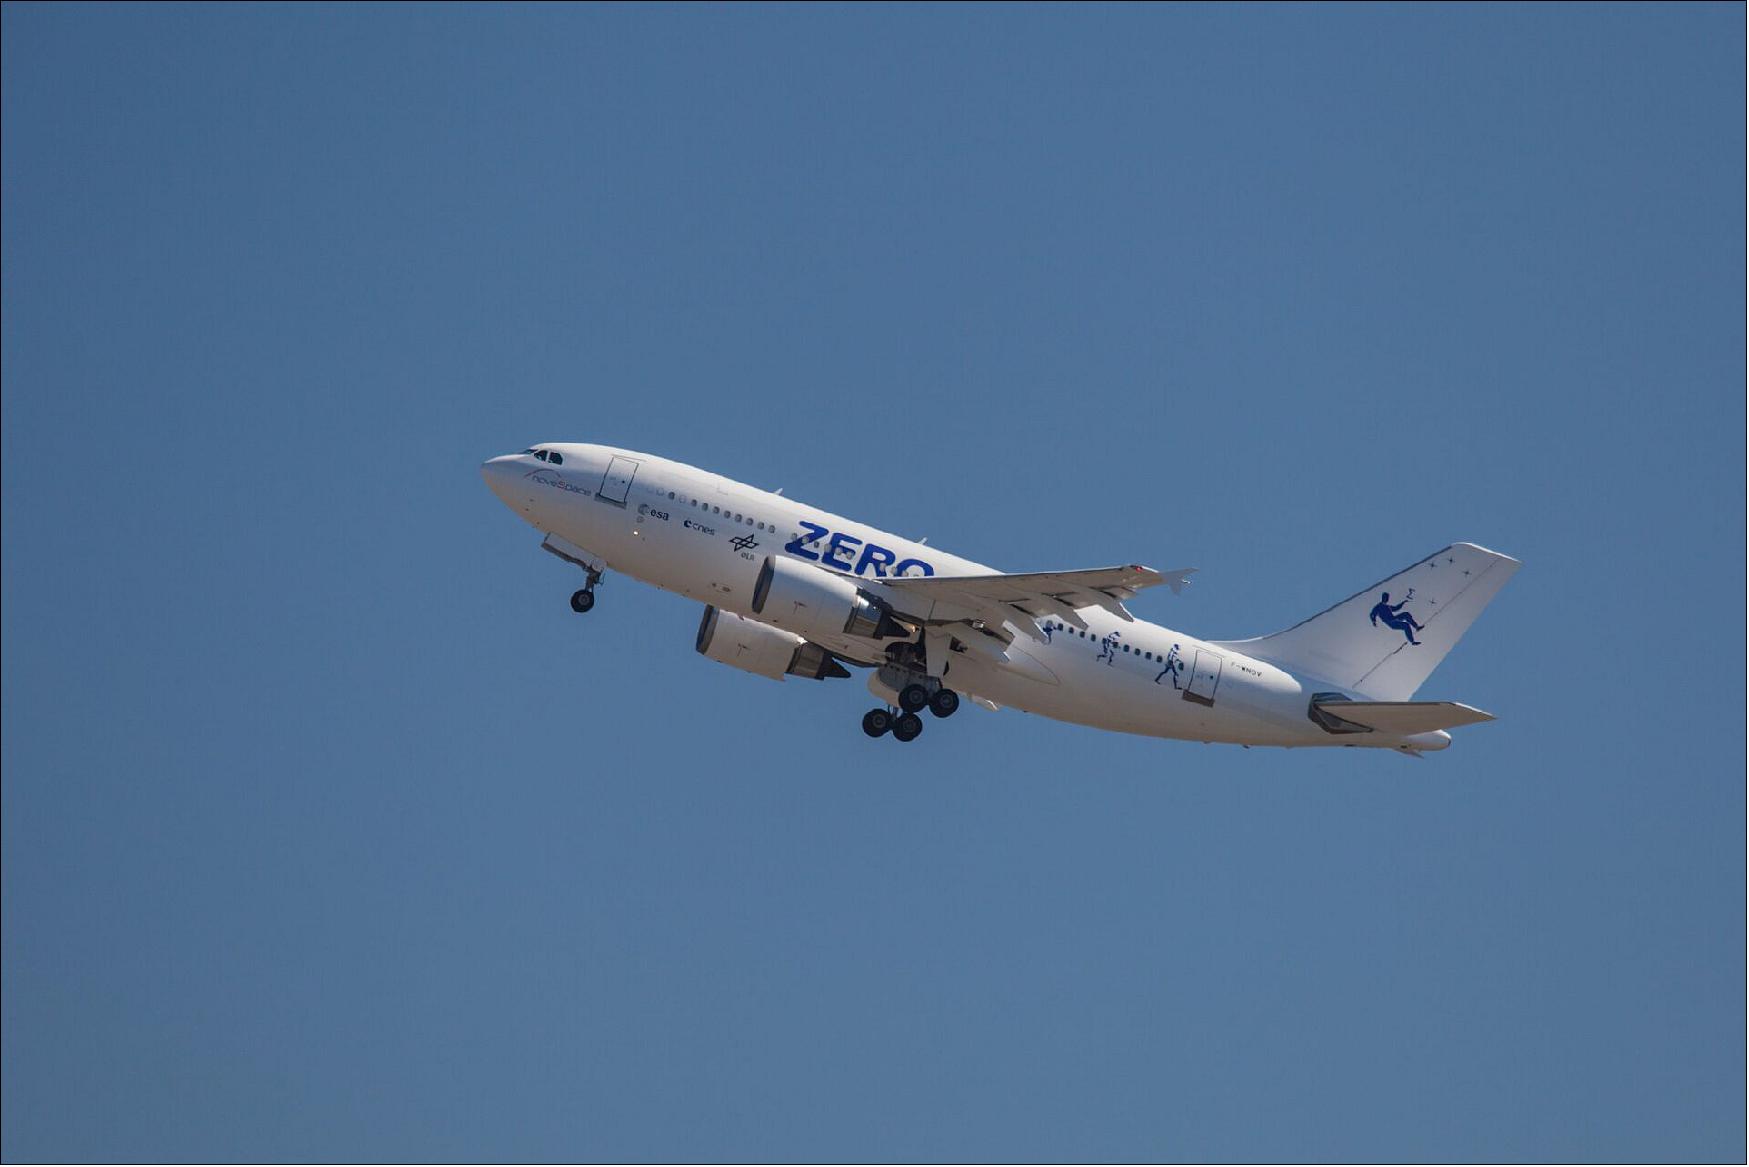 Figure 3: Zero-G takeoff. The refitted Airbus A310 aircraft after take-off for a test-flight for weightless research. Although the aircraft can weigh up to 157 tonnes, skilled pilots angle its nose 50º upwards to create brief periods of weightlessness. At the top of each curve, the forces on the passengers and objects inside cancel each other out, causing everything to float in weightlessness. During the climb and pulling out of the descent, the occupants endure almost twice normal gravity. A person weighing 80 kg on Earth will feel as if they weighed 160 kg for around 20 seconds. Conducting hands-on experiments in weightlessness and hypergravity is enticing for researchers in fields as varied as biology, physics, medicine and applied sciences. French company Novespace has conducted these ‘parabolic flights’ for more than 25 years. This aircraft was acquired in 2014 to replace their trusty Airbus A300. Most seats were removed to provide as much space as possible inside, while padded walls provide a soft landing for the researchers – the changes in ‘gravity’ can be hard to handle. Extra monitoring stations were installed for a technician to monitor the aircraft system’s as it is pushed to its limits – this is no transatlantic cruise (image credit: ESA)